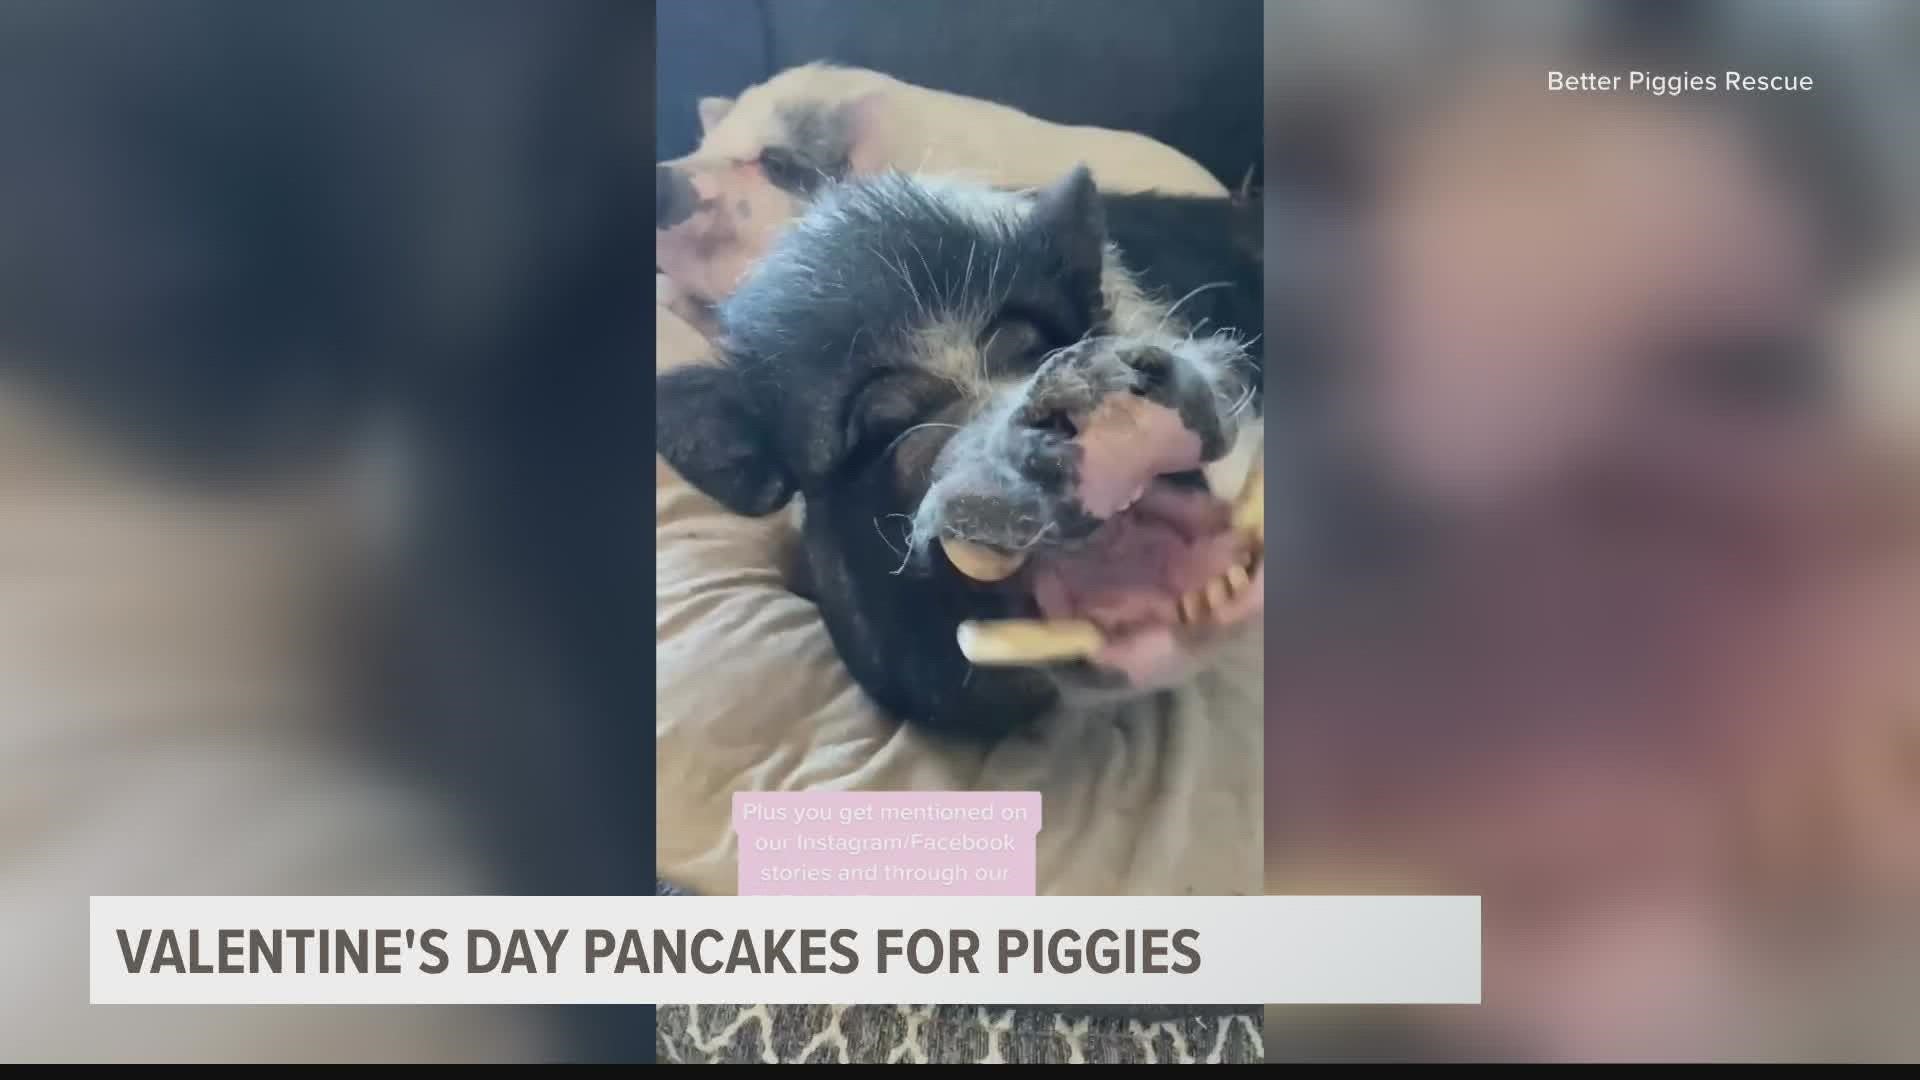 Better Piggies Rescue in Cave Creek will celebrate Valentine's Day this year by giving their pigs heart-shaped pancakes for every donation made to the sanctuary.